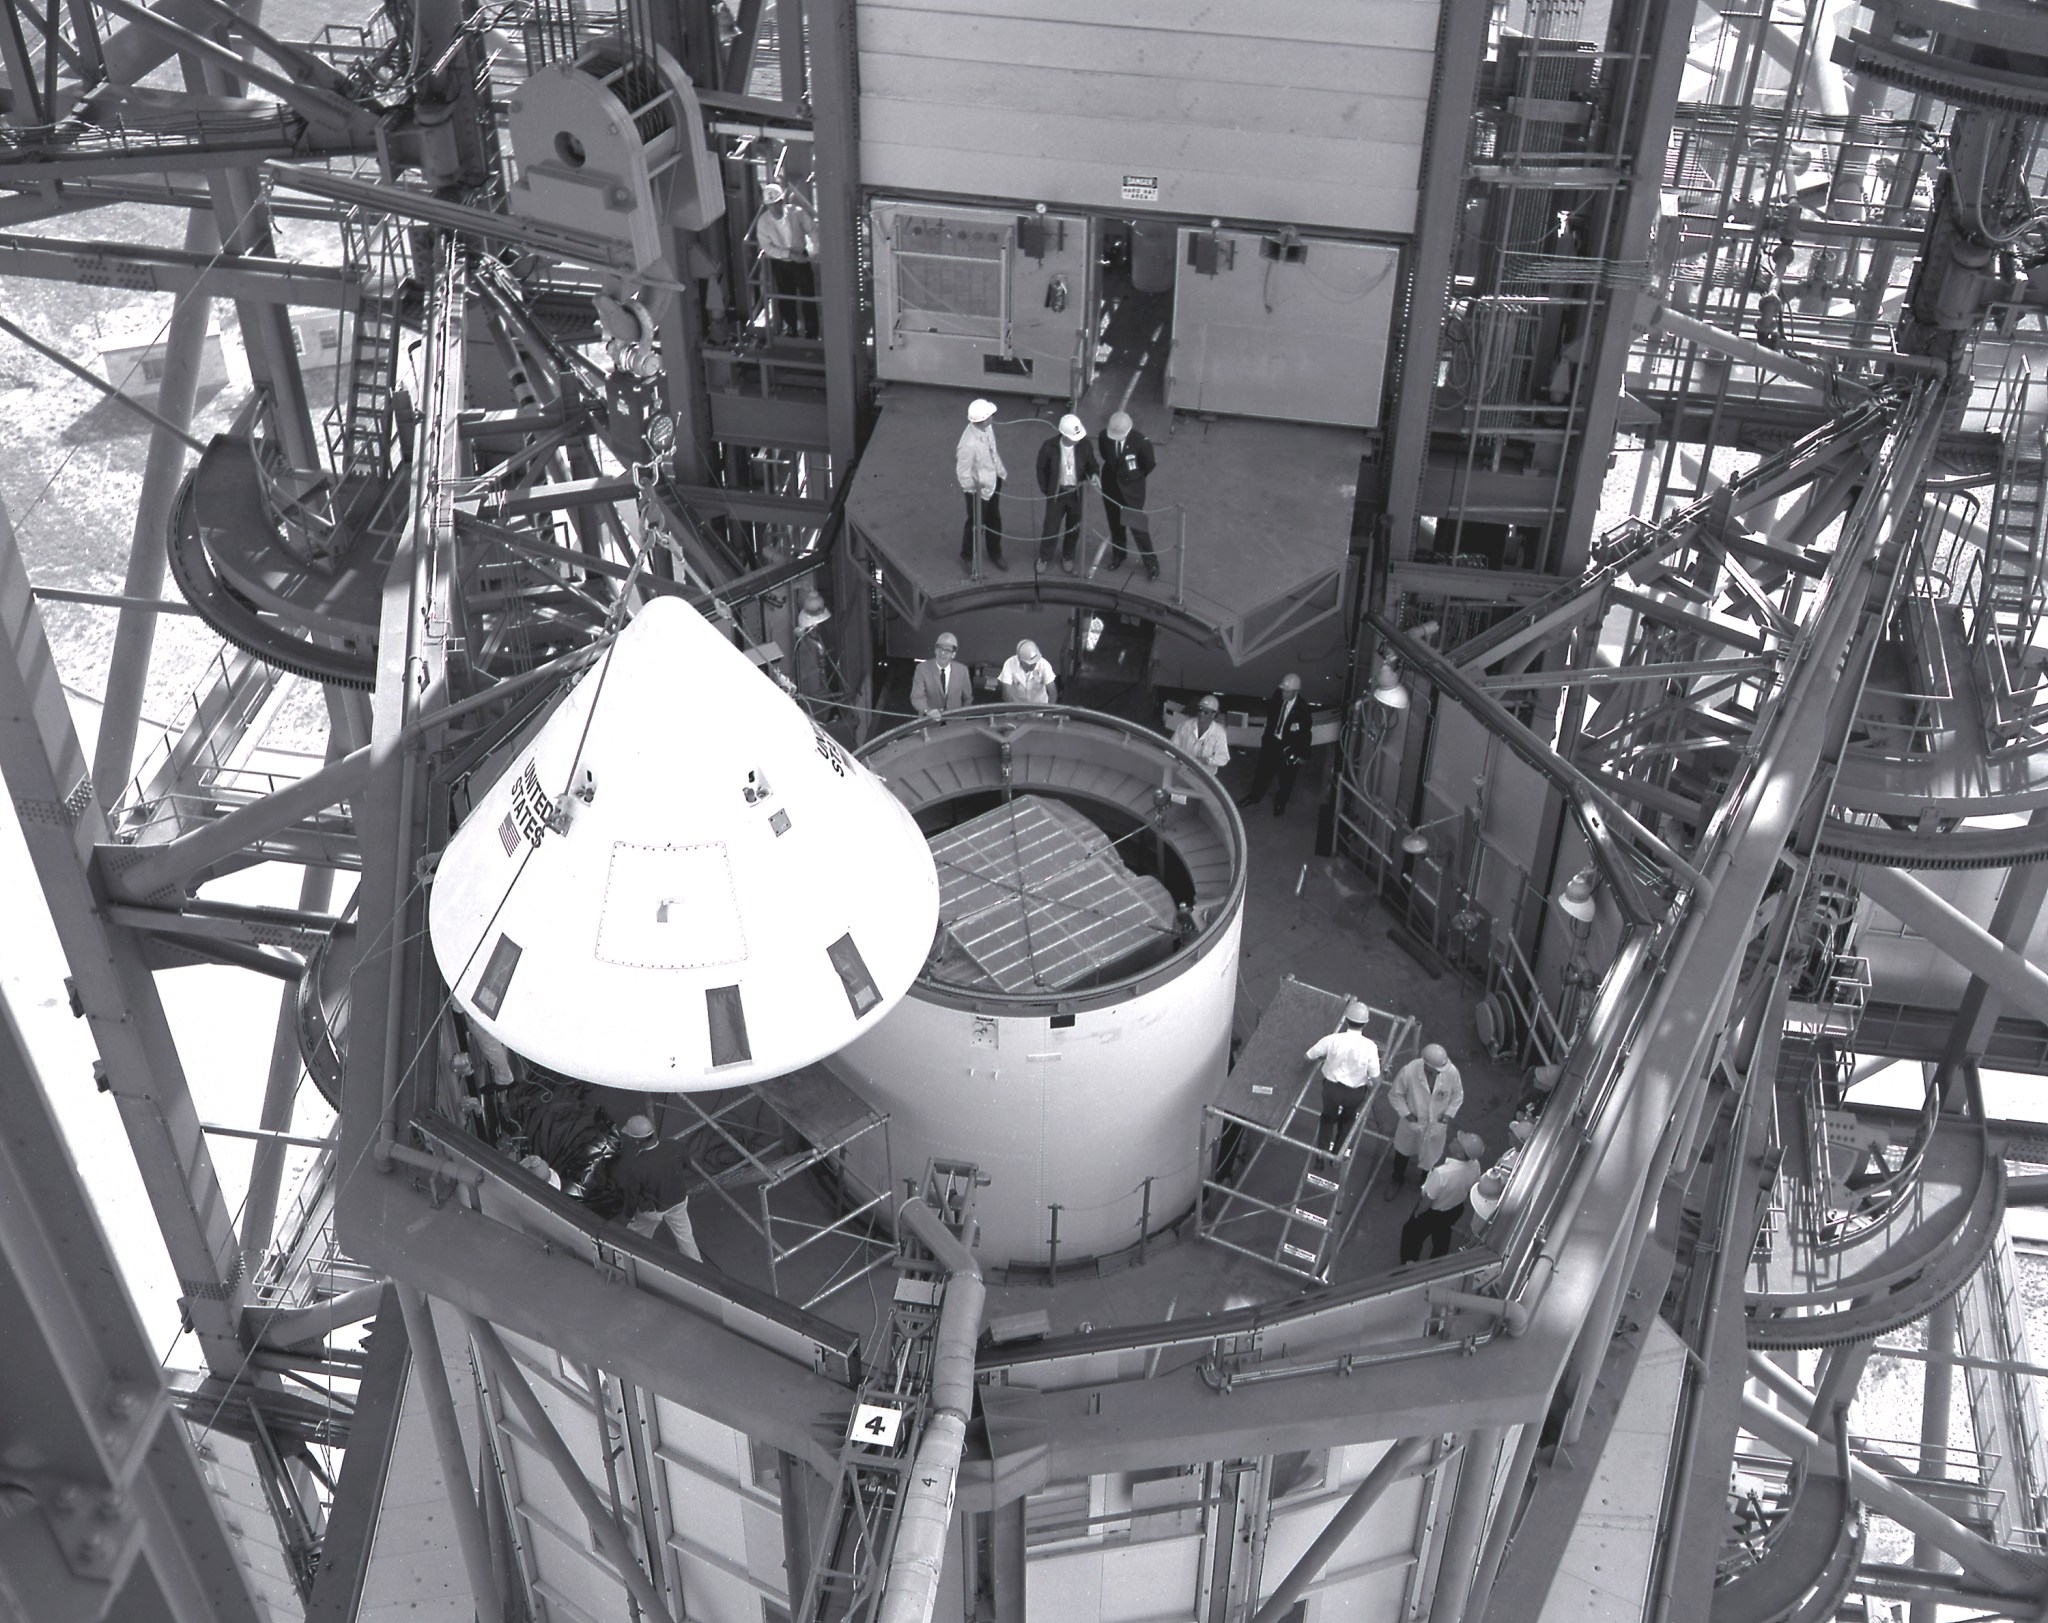 The Pegasus satellite is installed atop the S-IV stage (second stage) of a Saturn I vehicle.